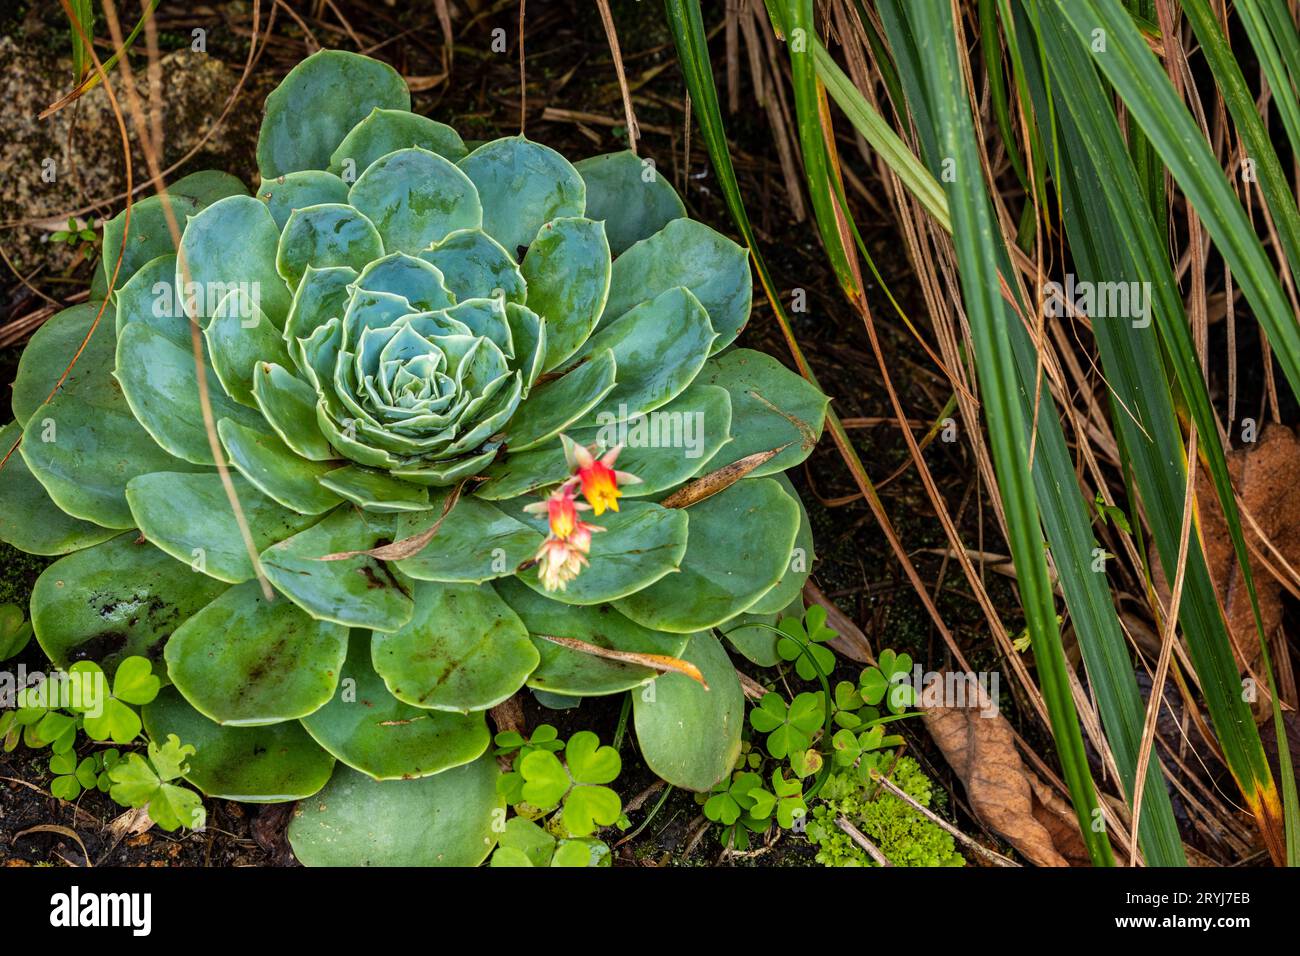 The rosette of a succulent plant Stock Photo